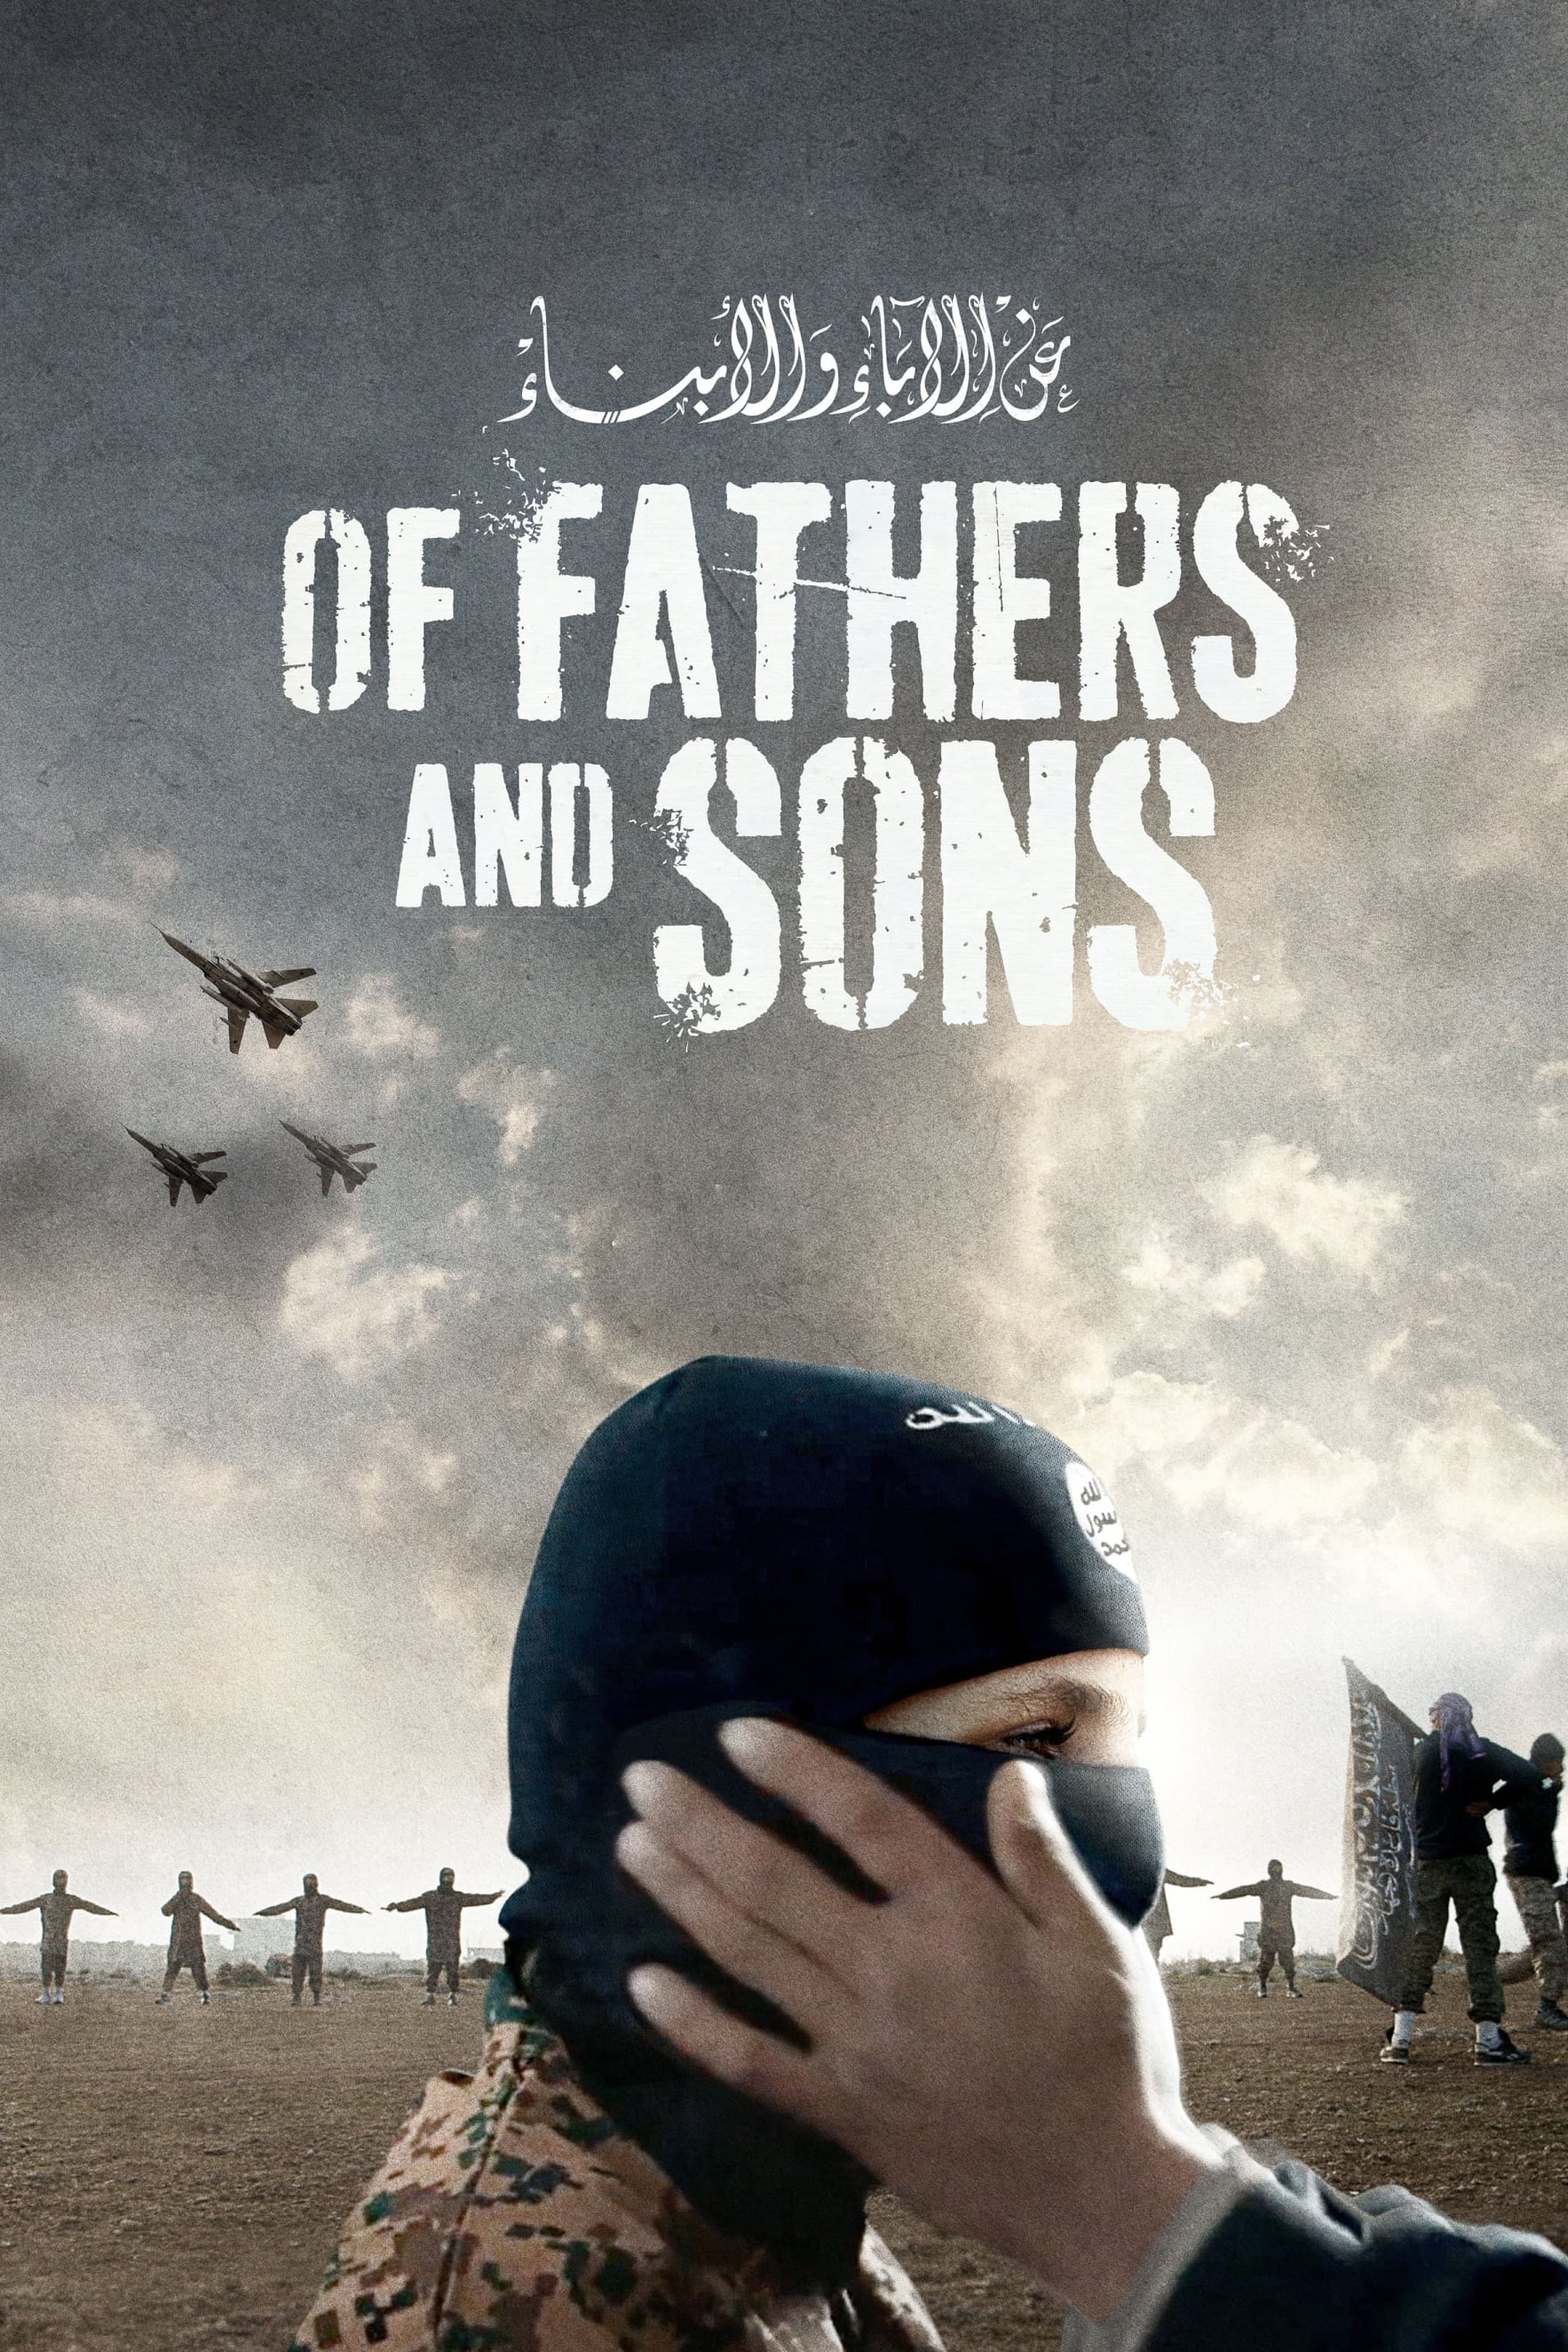 Poster for the movie "Of Fathers and Sons"